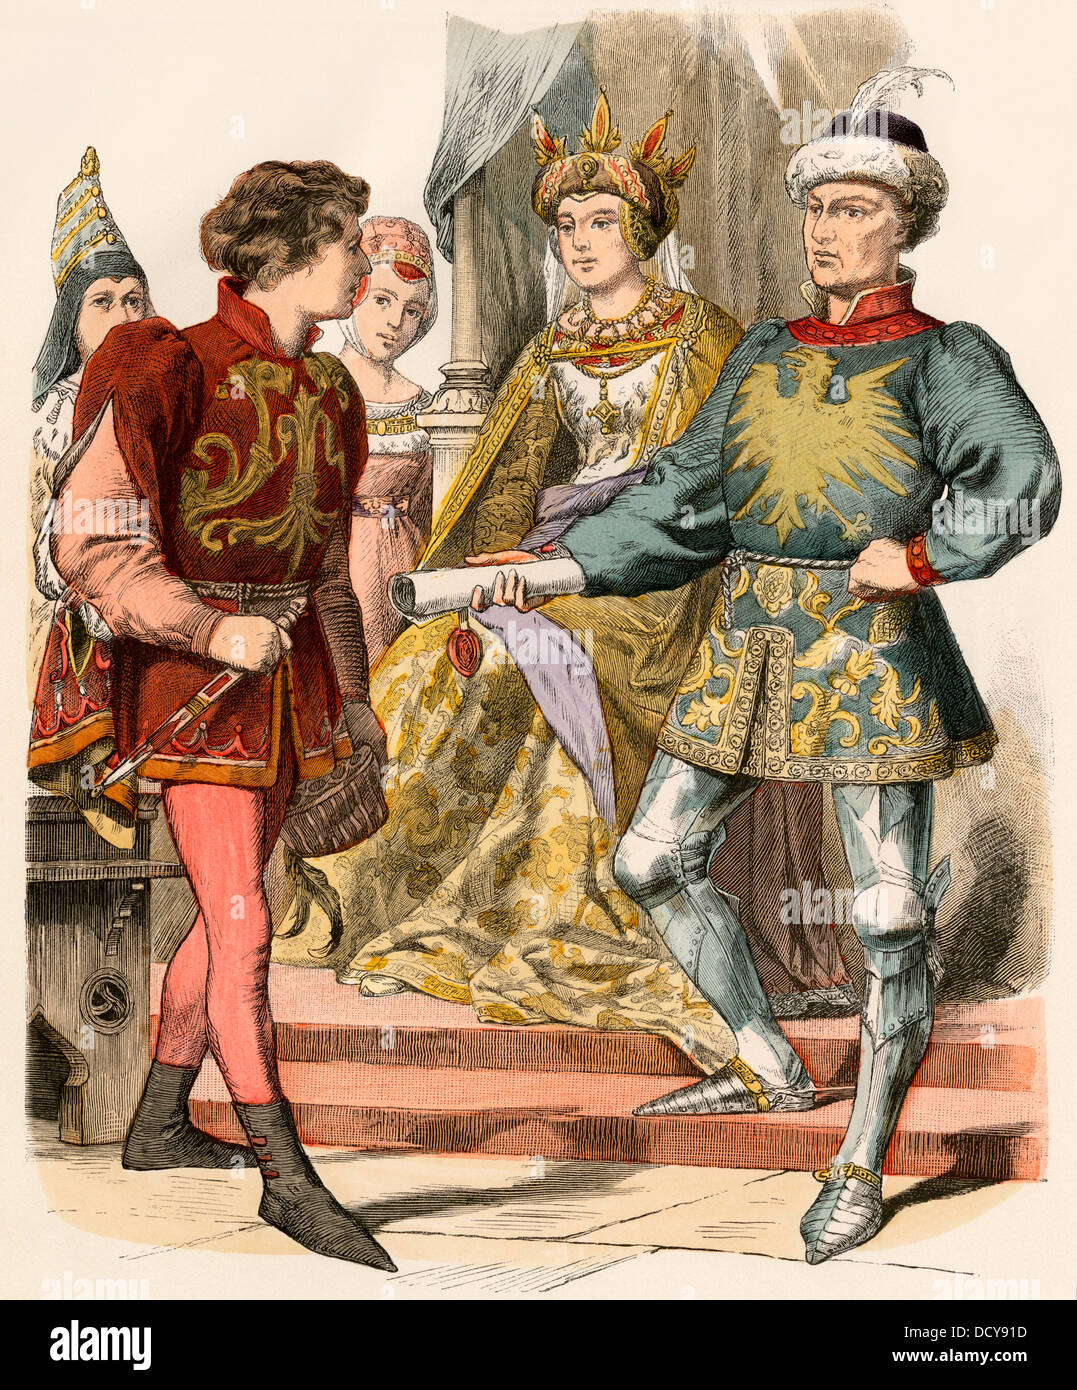 Burgundian nobility in the late 1400s. Hand-colored print Stock Photo